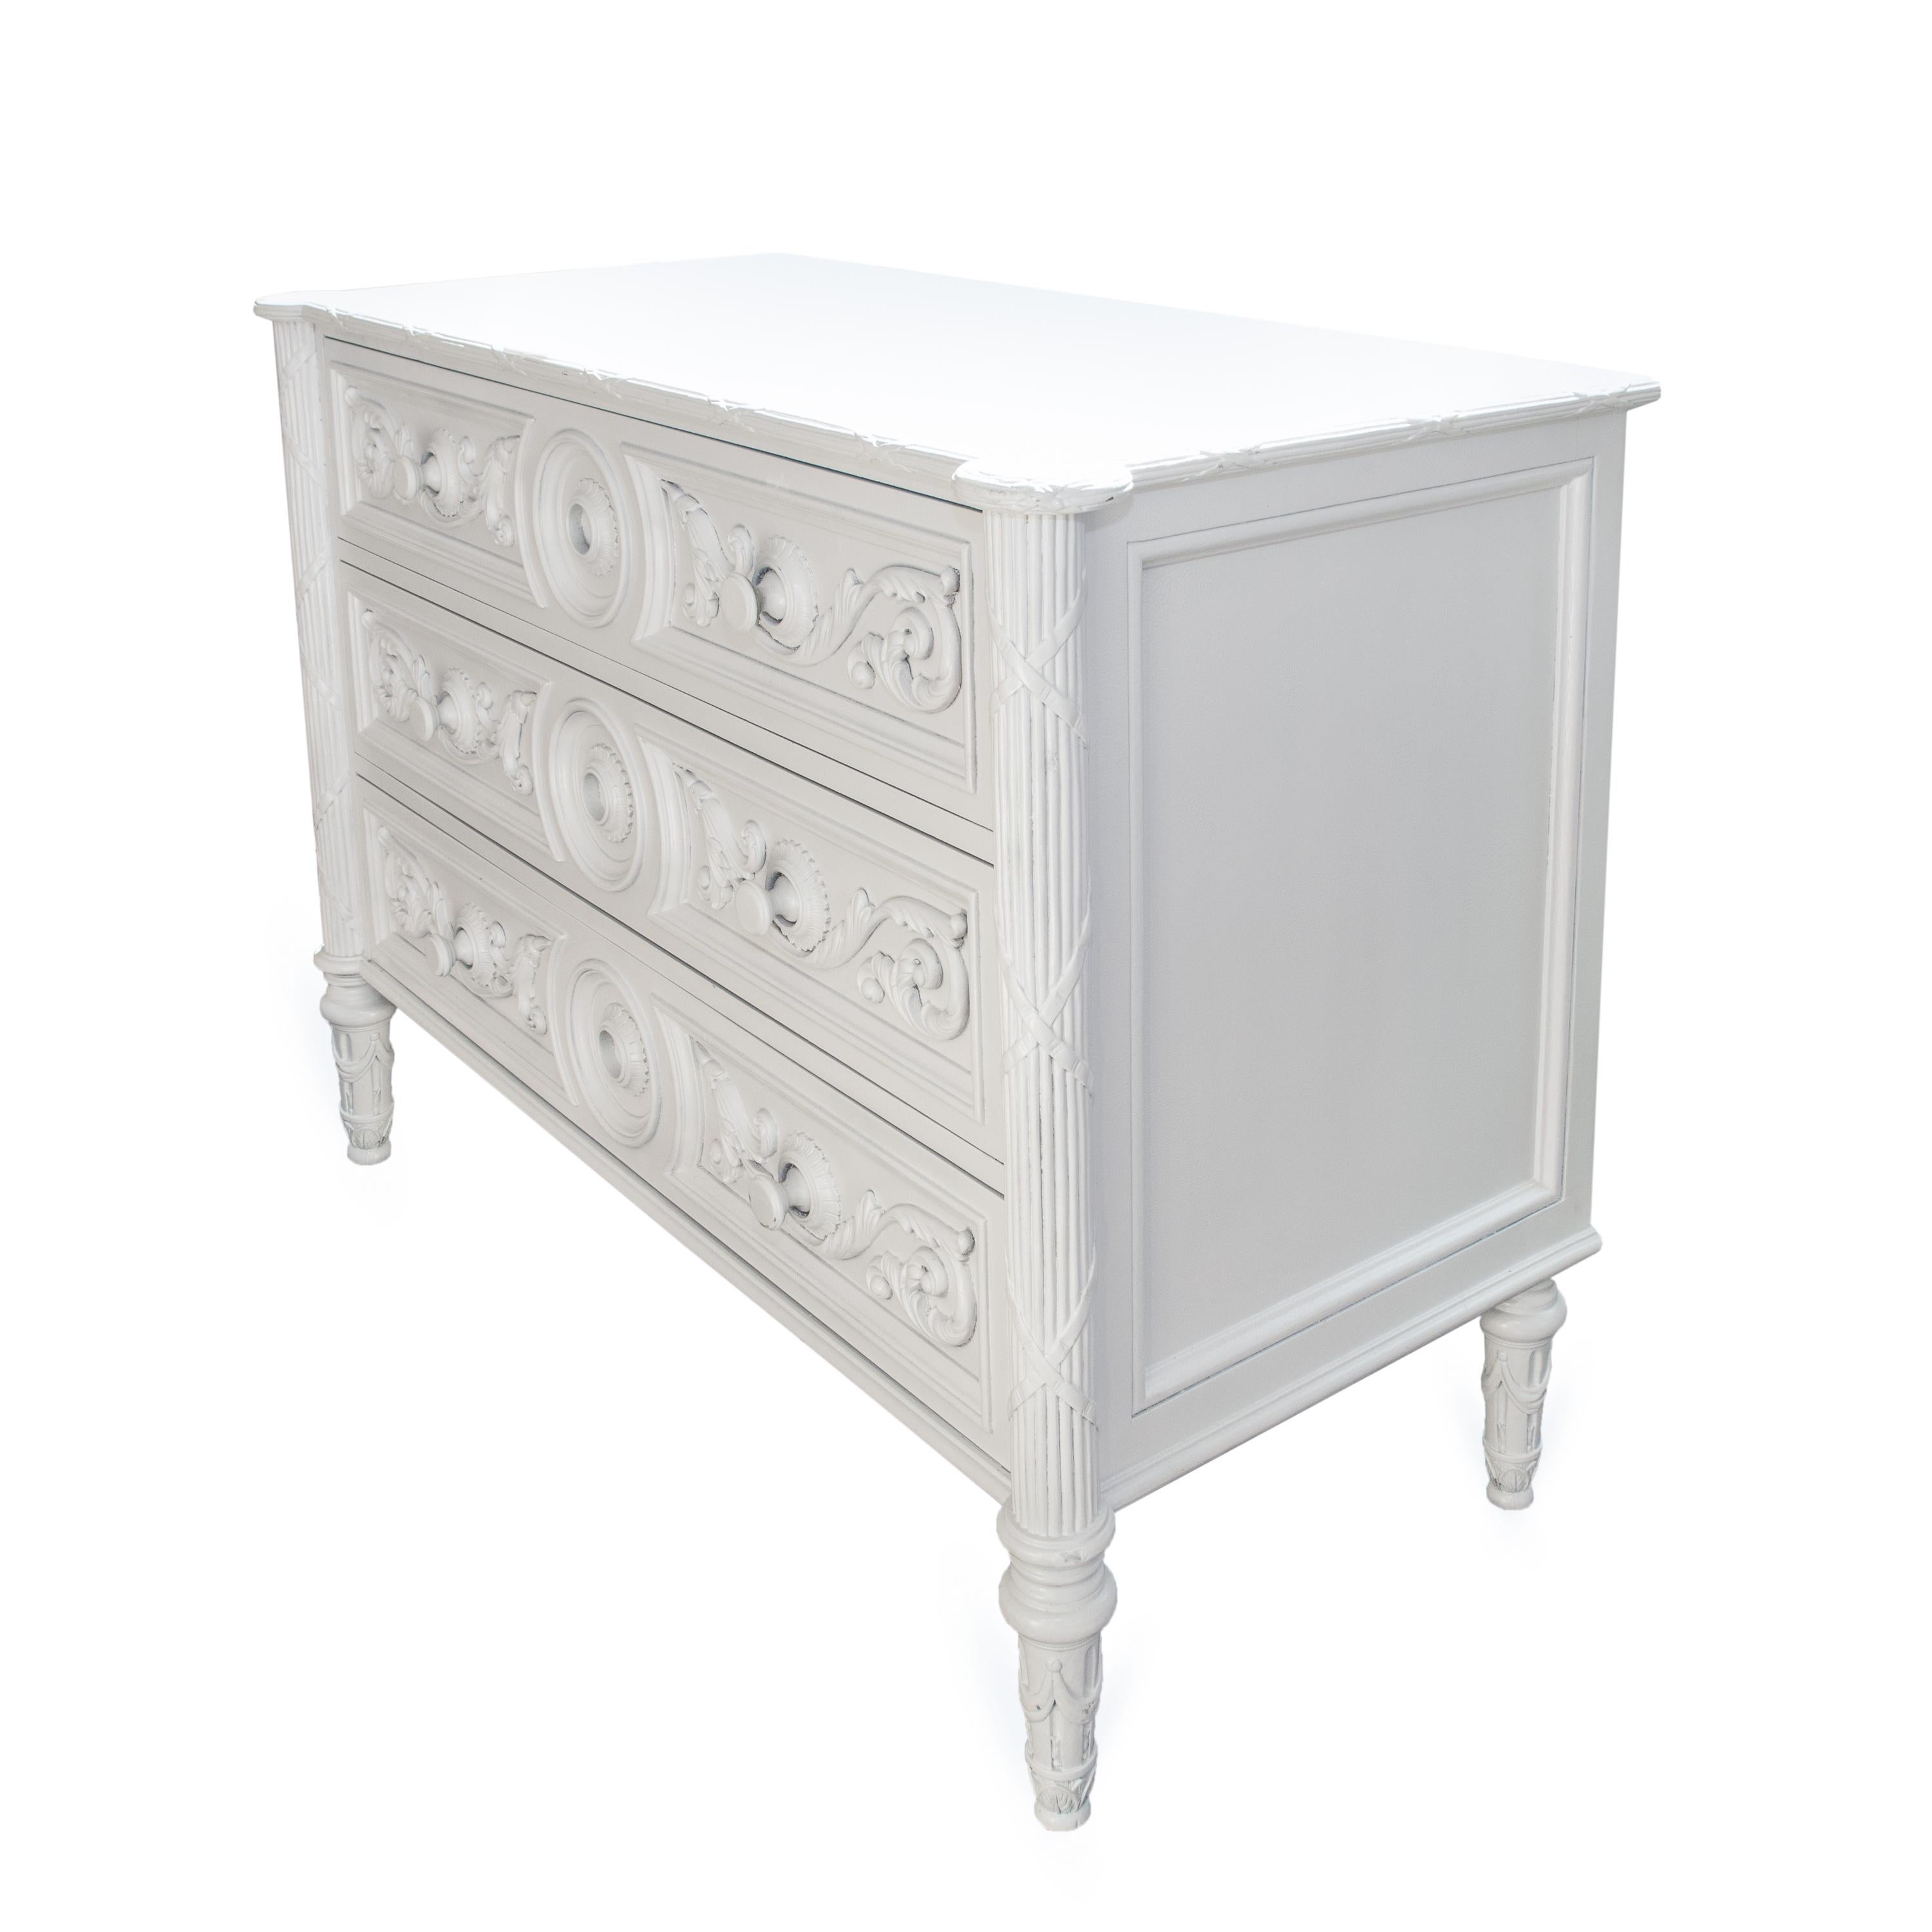 This is a white-painted American chest of drawers. The top has a rounded edge over three long graduated drawers with carved ornamentation on the drawer faces and supported by round tapered feet. The sides are paneled, 20th century.